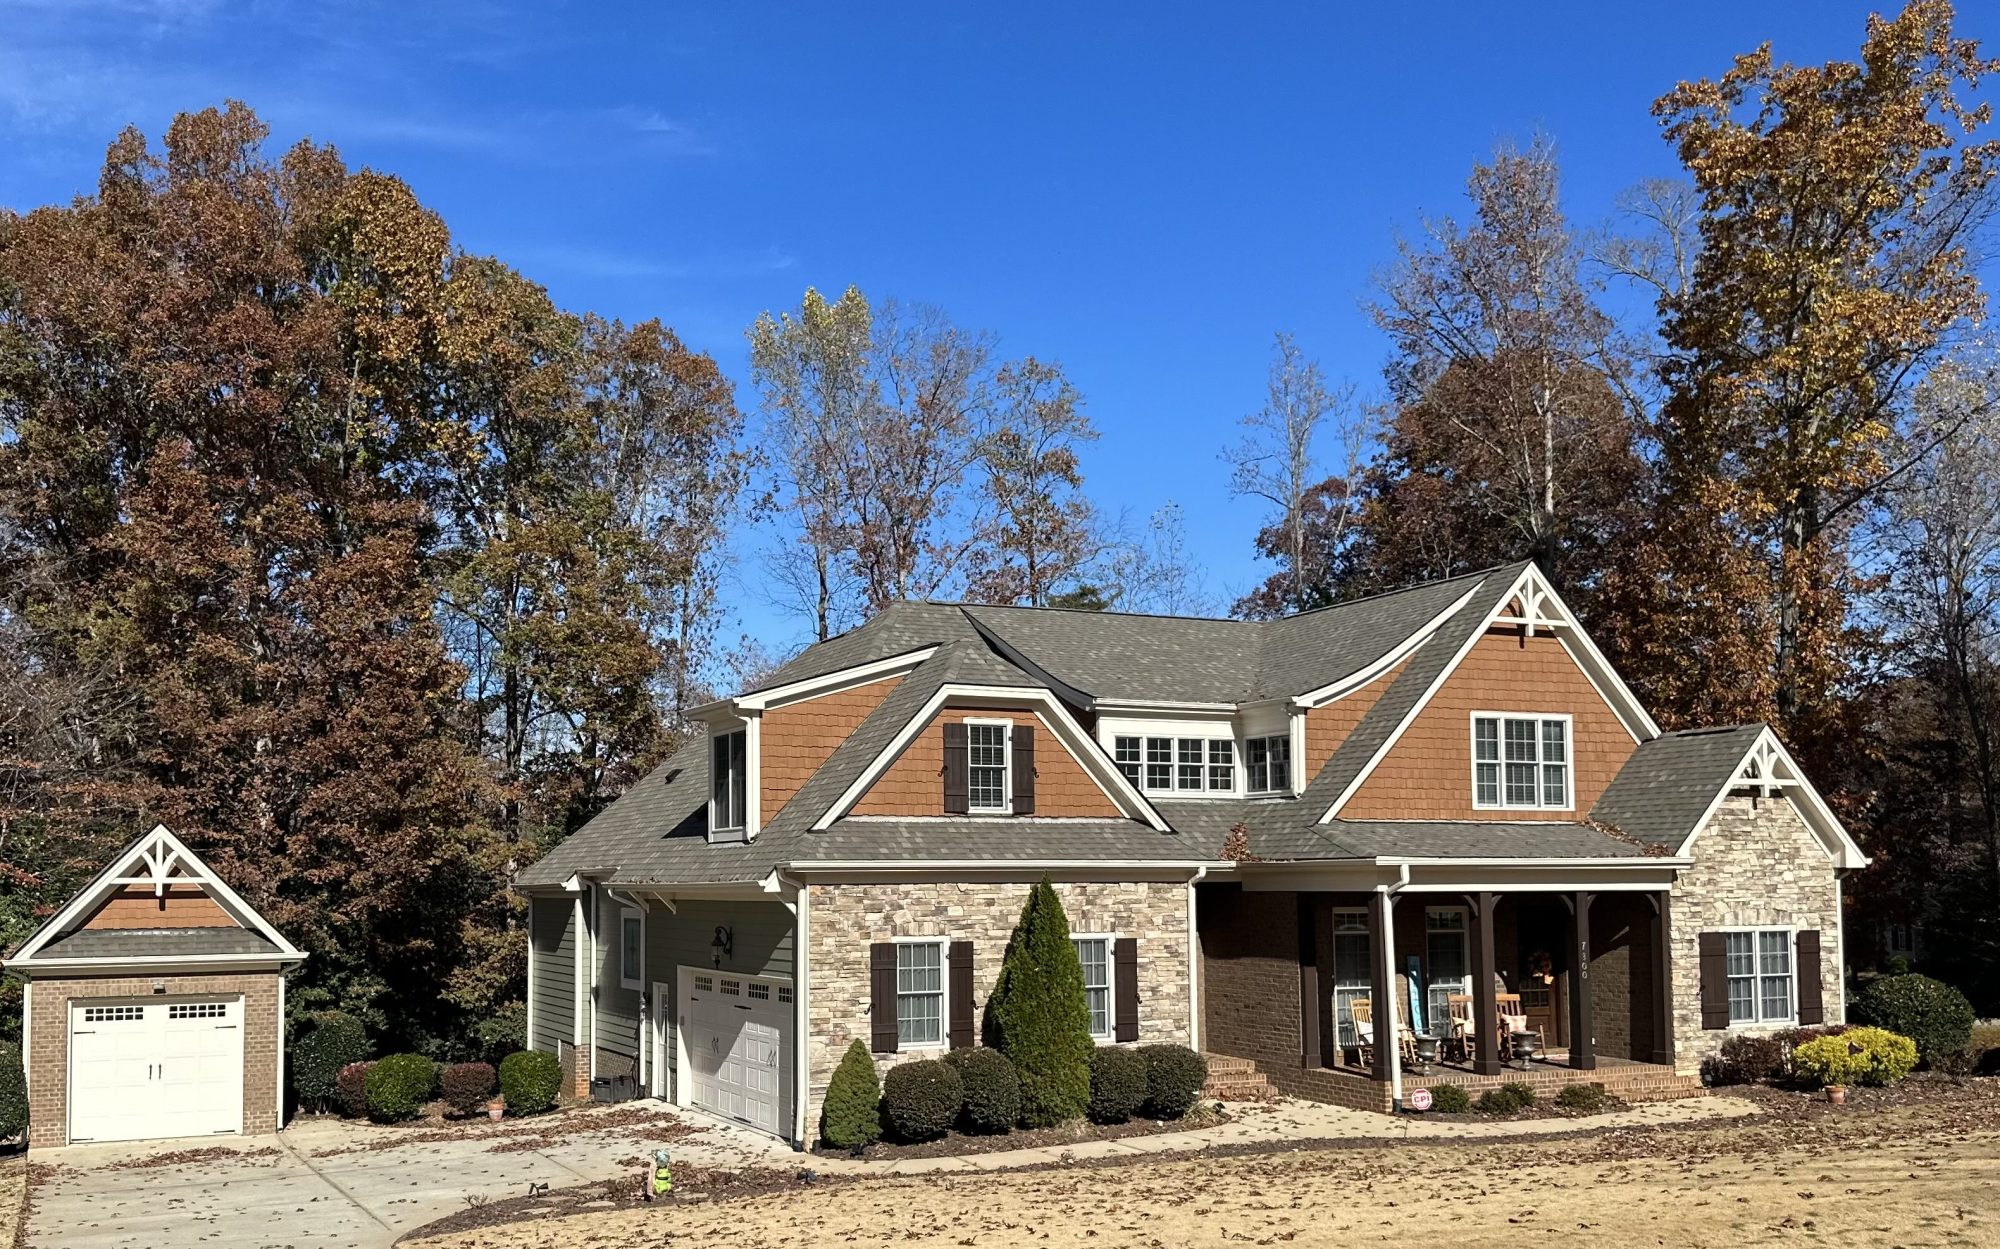 Shingle home roof | Roofing Contractors near me in Angier